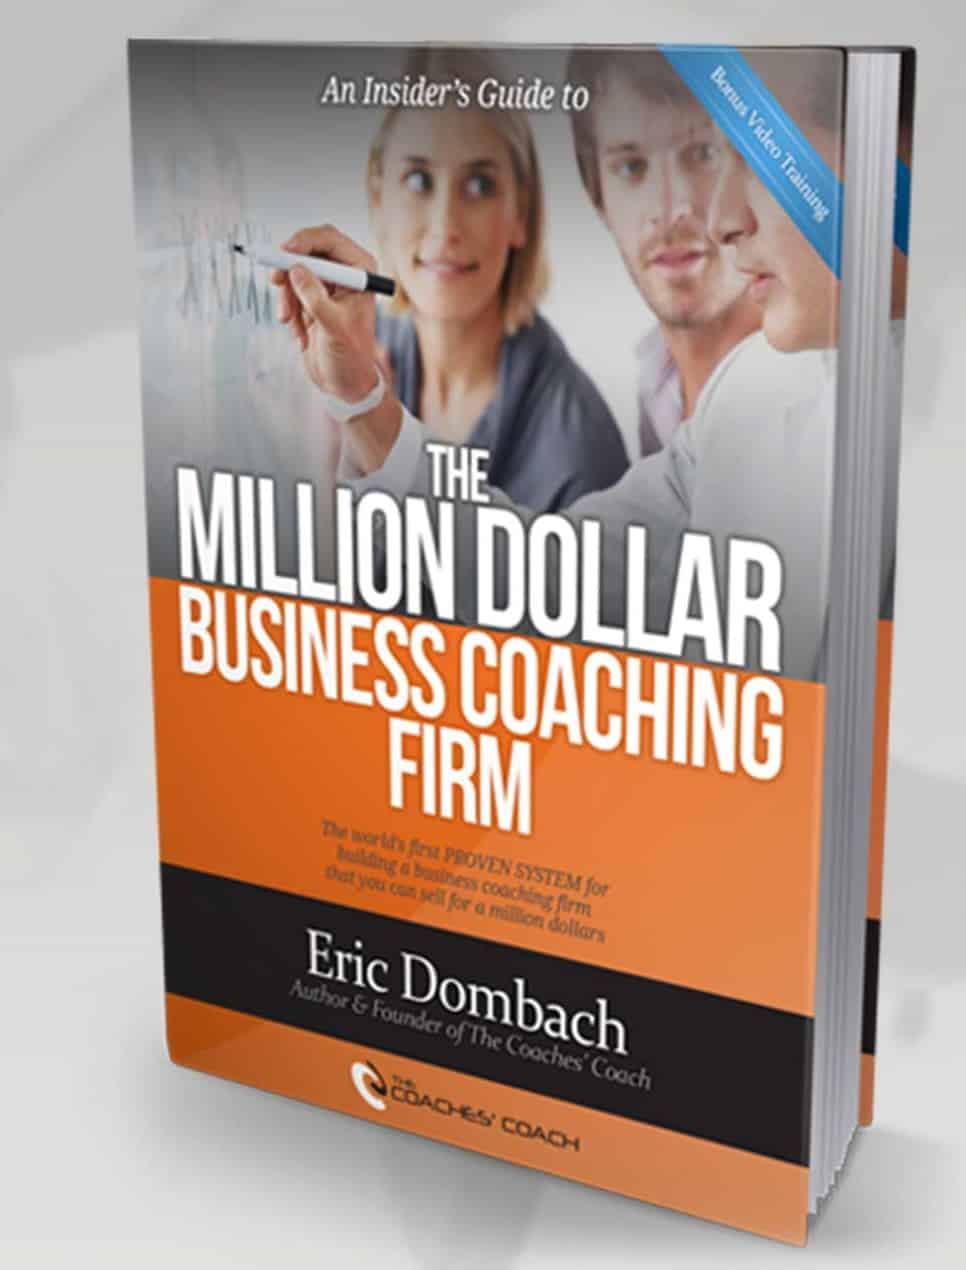 Amazon's Authoritative Guide to Setting Up a Coaching Business